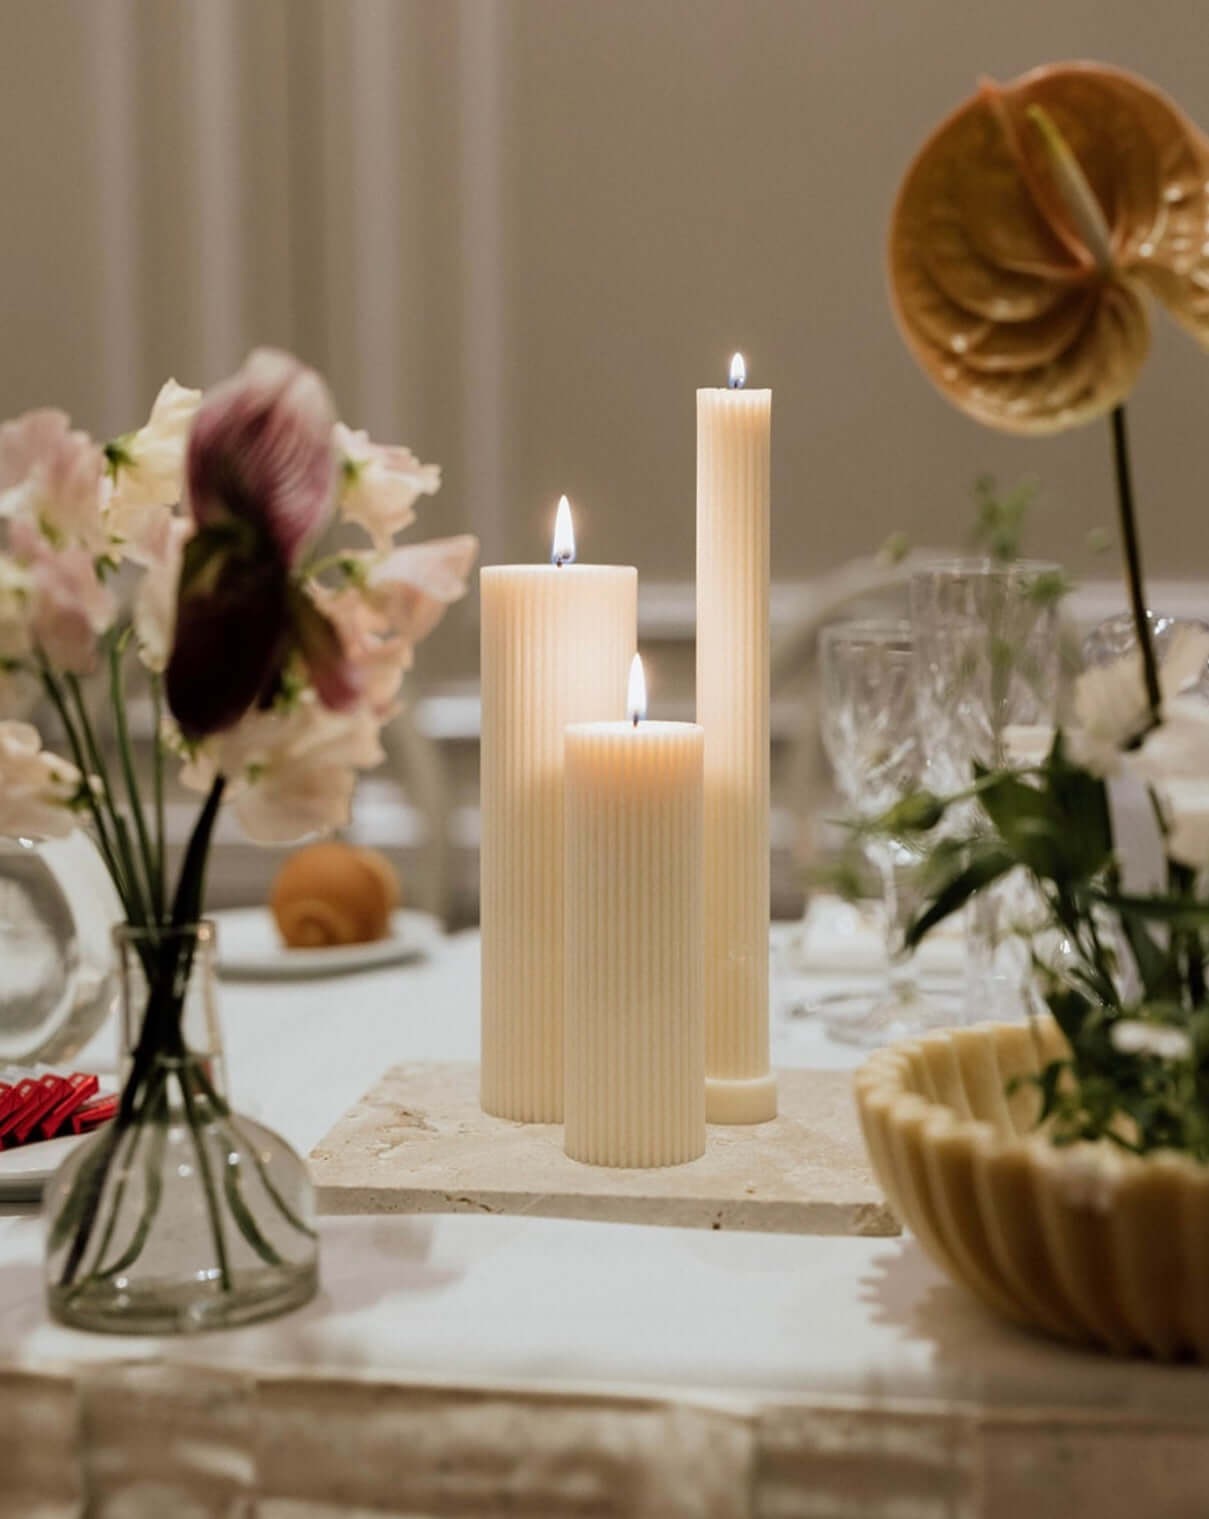 Wedding reception centrepiece ideas | Sculptural Candle Australia | Candle Decorations | Home Decorations | Bubble Candles | Free Standing Candles | Clean Candles | Sculptural Candles | Candles Australia | Scented Candles | Unscented Candles | Soy Wax Can